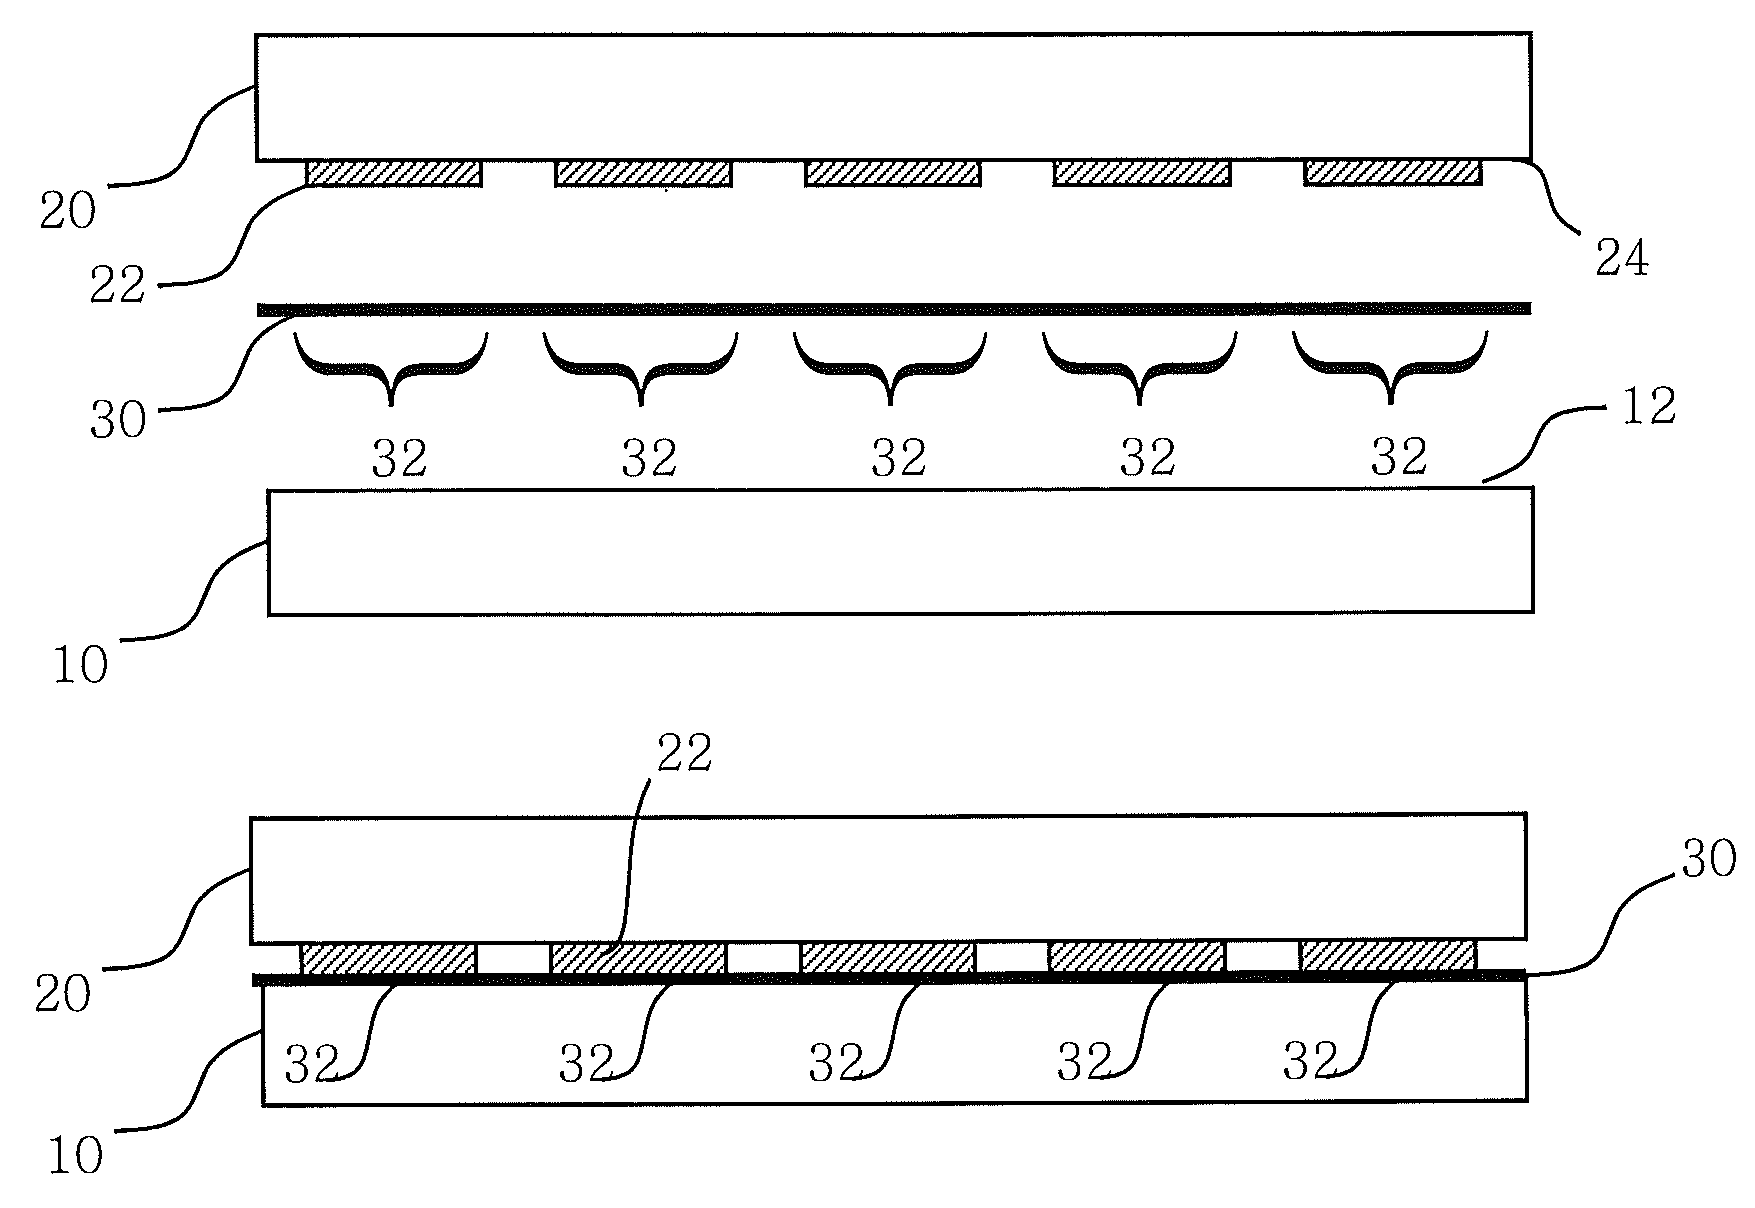 Methods of selectively transferring active components